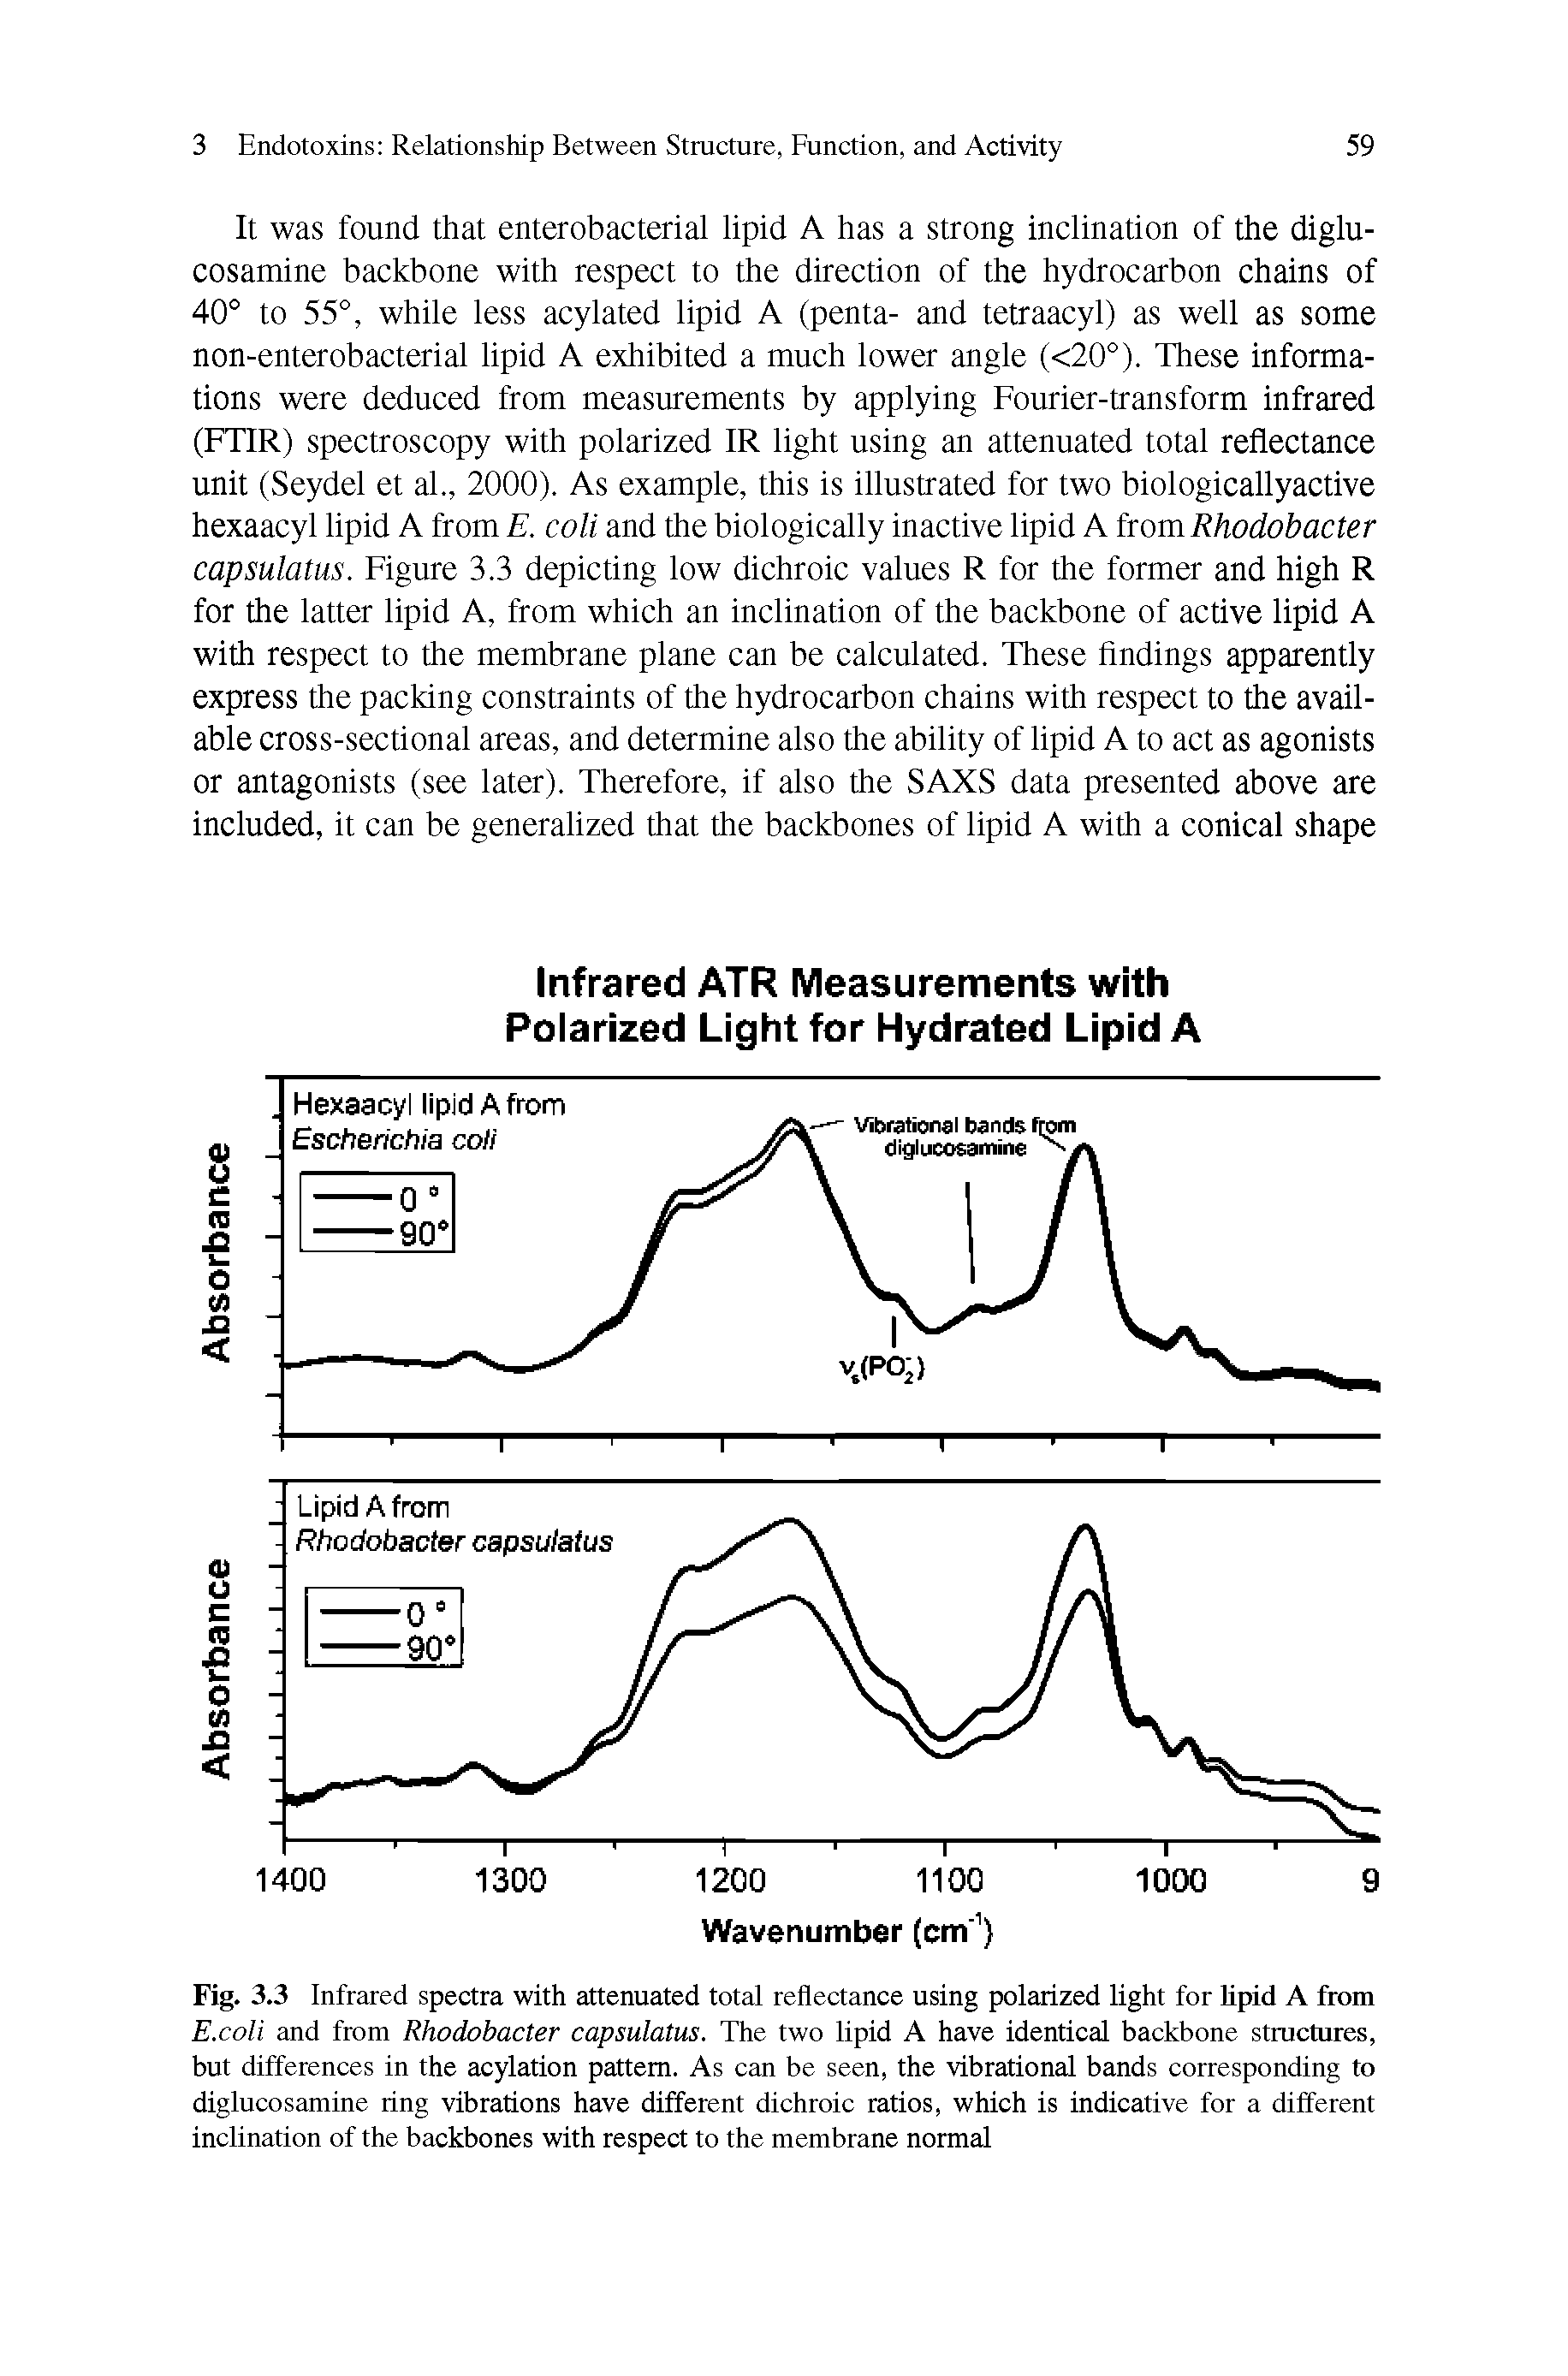 Fig. 3.3 Infrared spectra with attenuated total reflectance using polarized light for lipid A from E.coli and from Rhodobacter capsulatus. The two lipid A have identical backbone structures, but differences in the acylation pattern. As can be seen, the vibrational bands corresponding to diglucosamine ring vibrations have different dichroic ratios, which is indicative for a different inclination of the backbones with respect to the membrane normal...